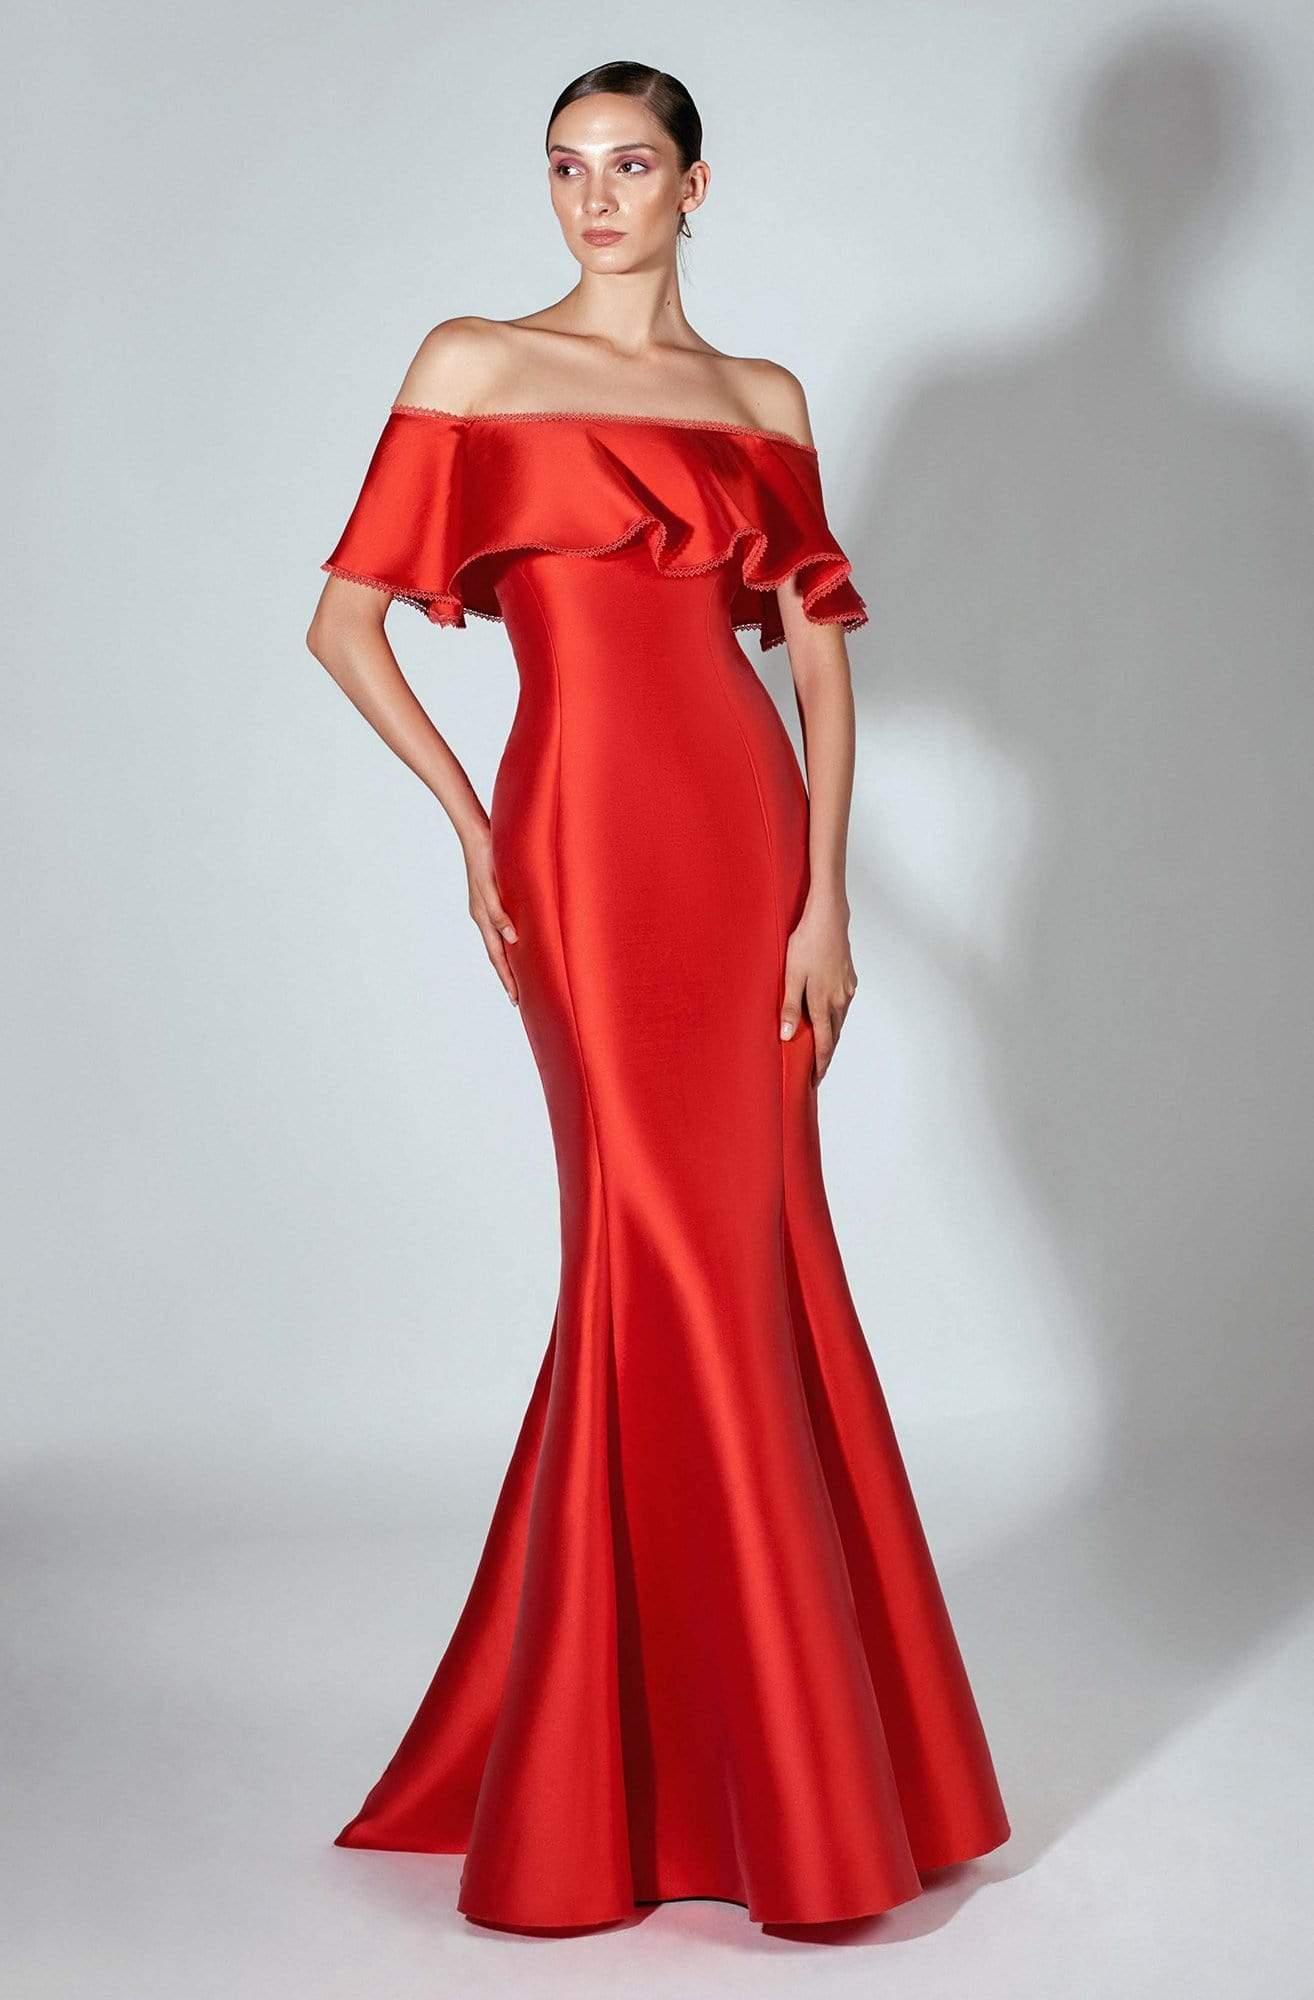 Beside Couture by Gemy - BC 1460 Ruffled Off-Shoulder Mermaid Dress Special Occasion Dress 0 / Red